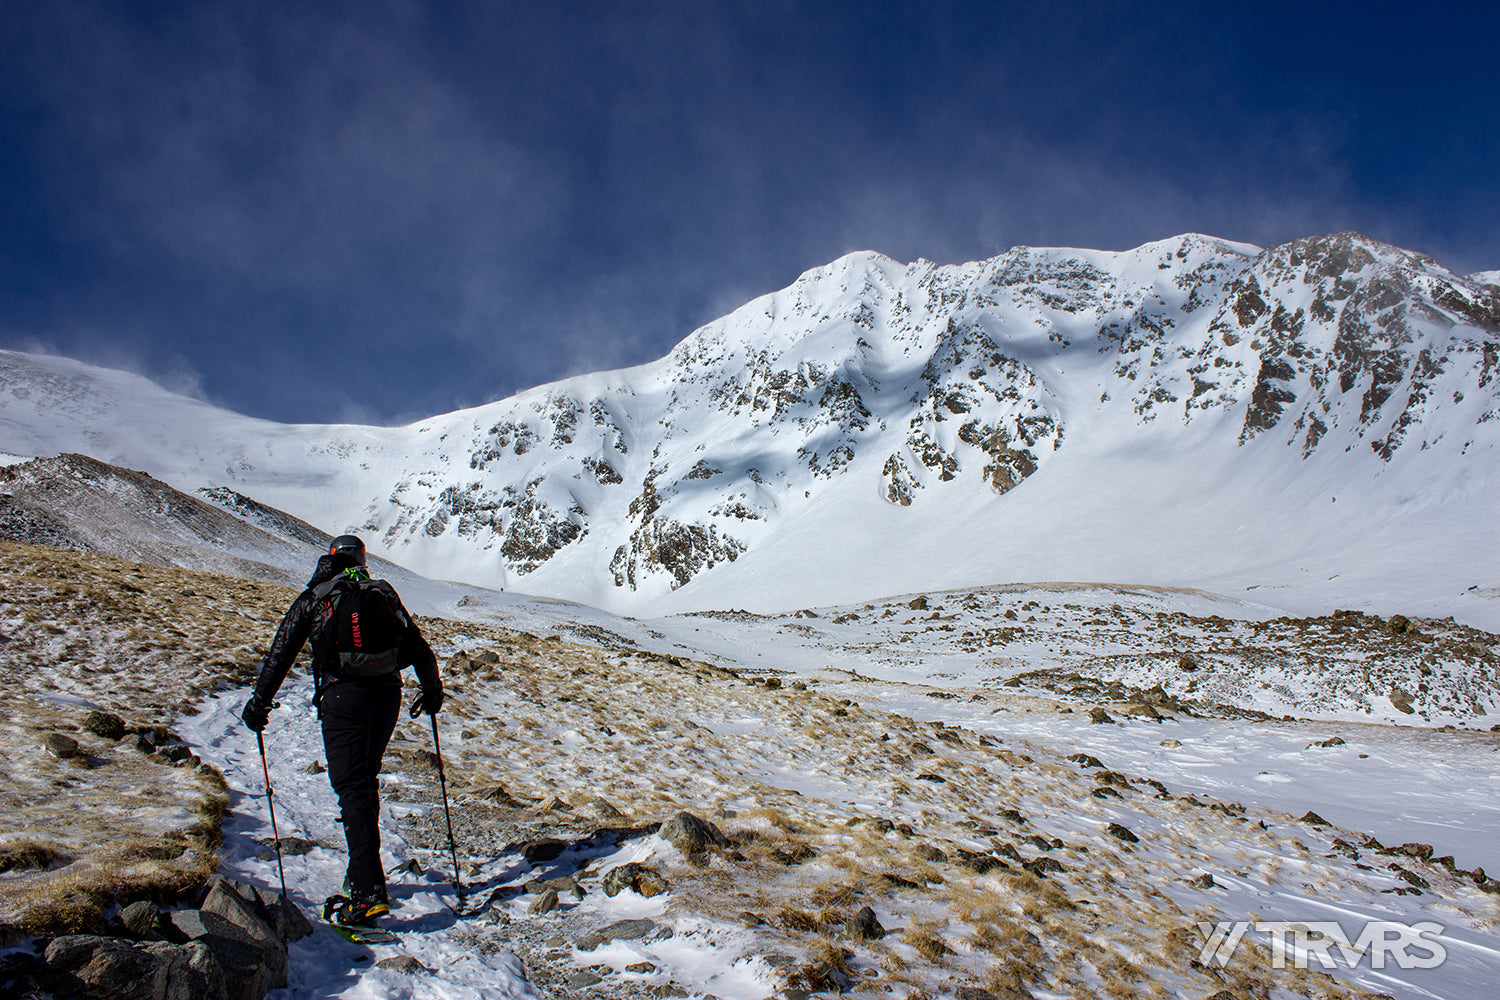 The Importance of Creating an Itinerary - Grays Peak Colorado Mountaineering | TRVRS Outdoors HIking Trail Running Backpacking